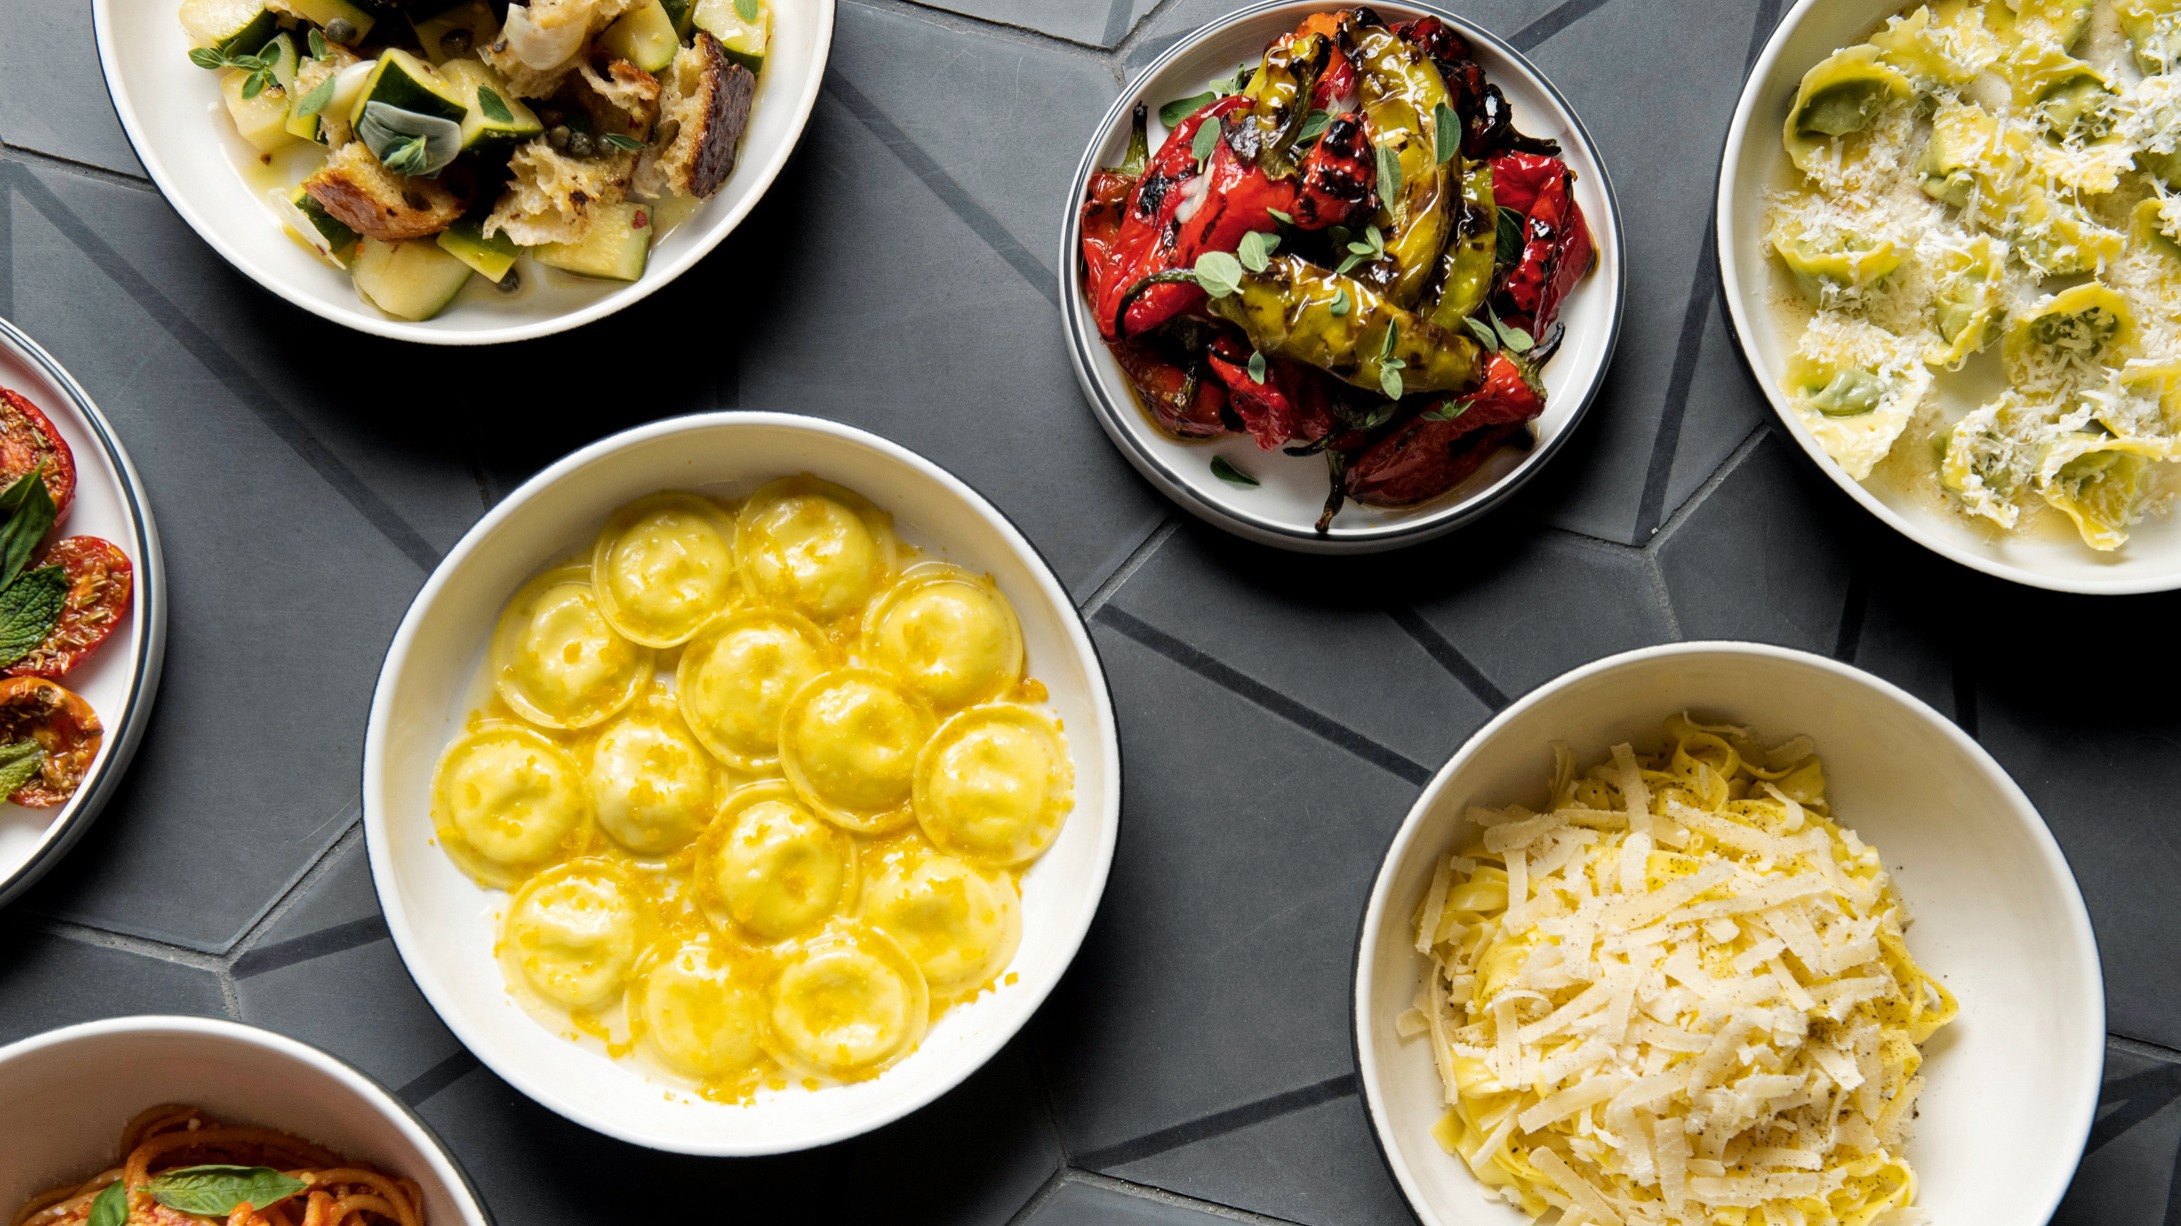 5 Of The Best Pasta Restaurants Financial Times